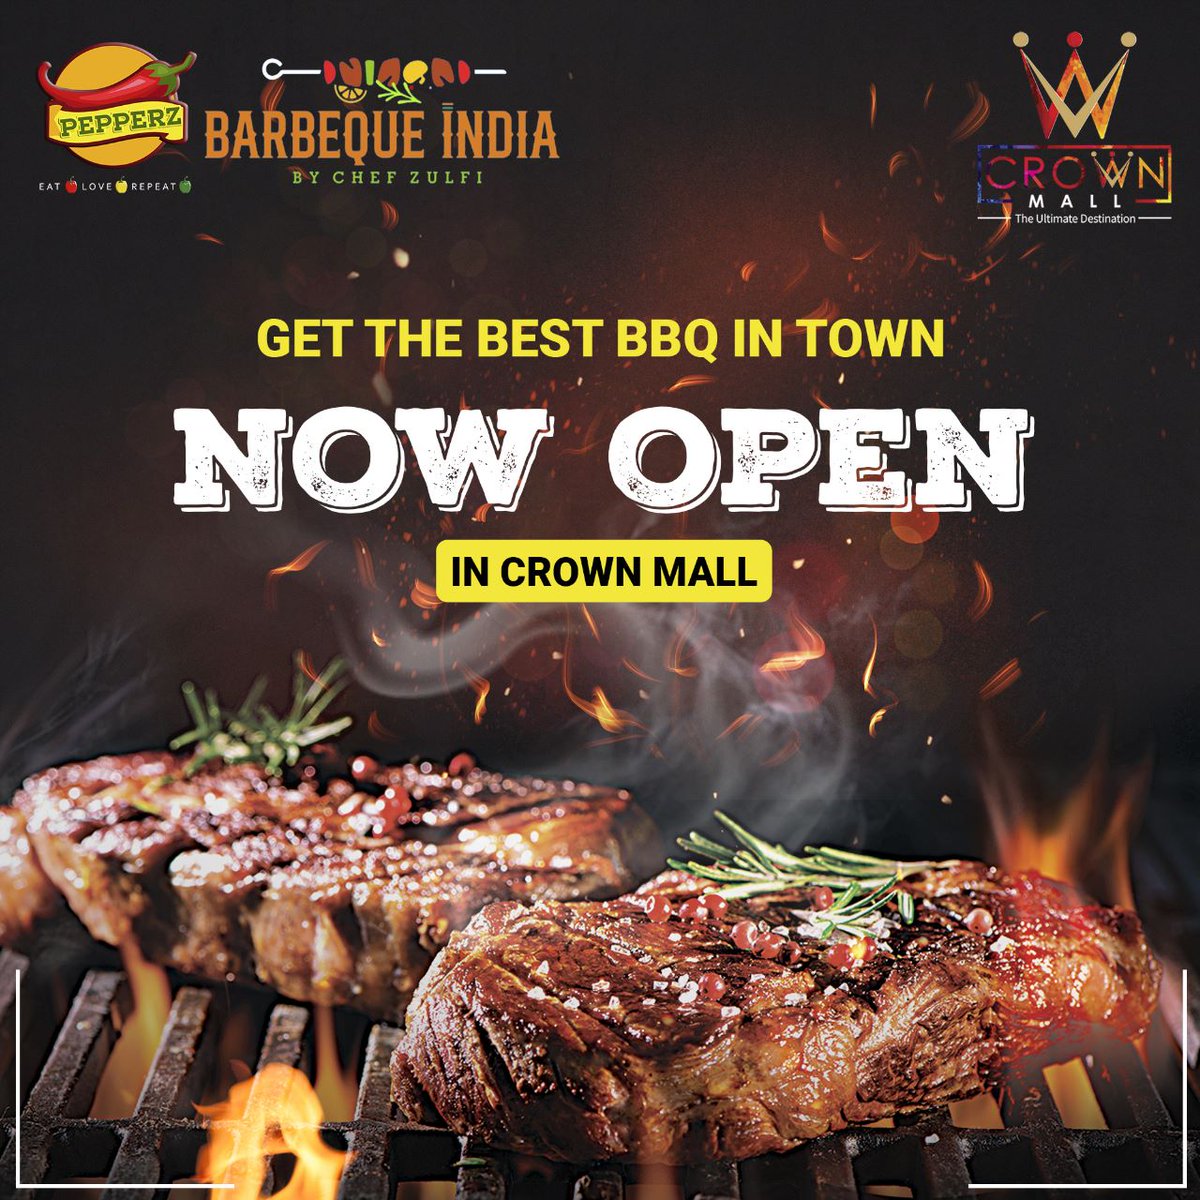 Come over to enjoy the best BBQ @ Crown Mall. Now Open !!😍

#CrownMall #BarbequeIndia #nowopen #Barbeque #BarbequeNation #BBQ #ShoppingMall #Lucknow #shoppingmallinlucknow #bestshoppingmall #lucknowcity